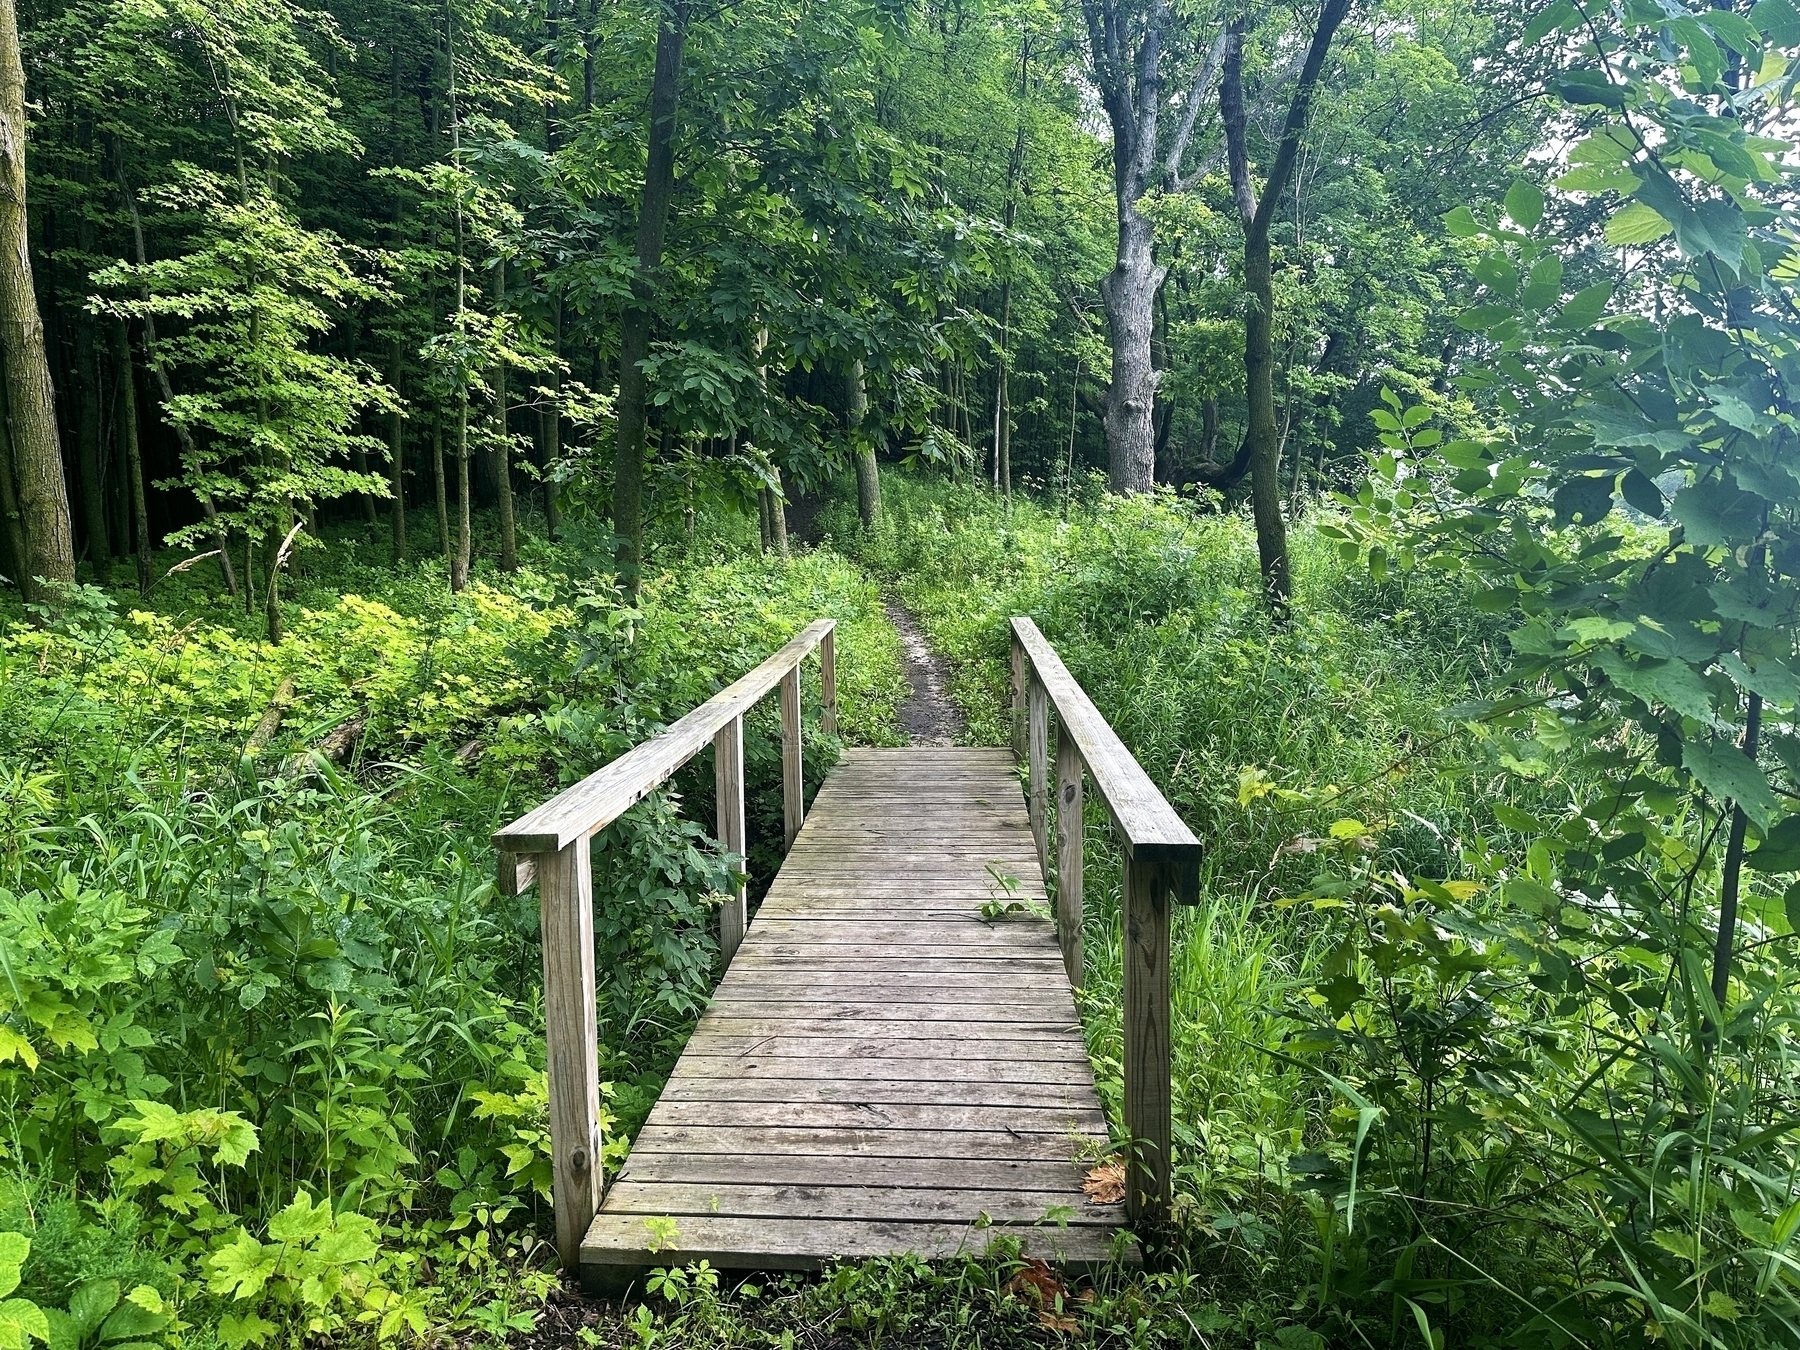 Wooden footbridge extends over lush greenery leading to a forested trail rich with dense trees and vibrant undergrowth.